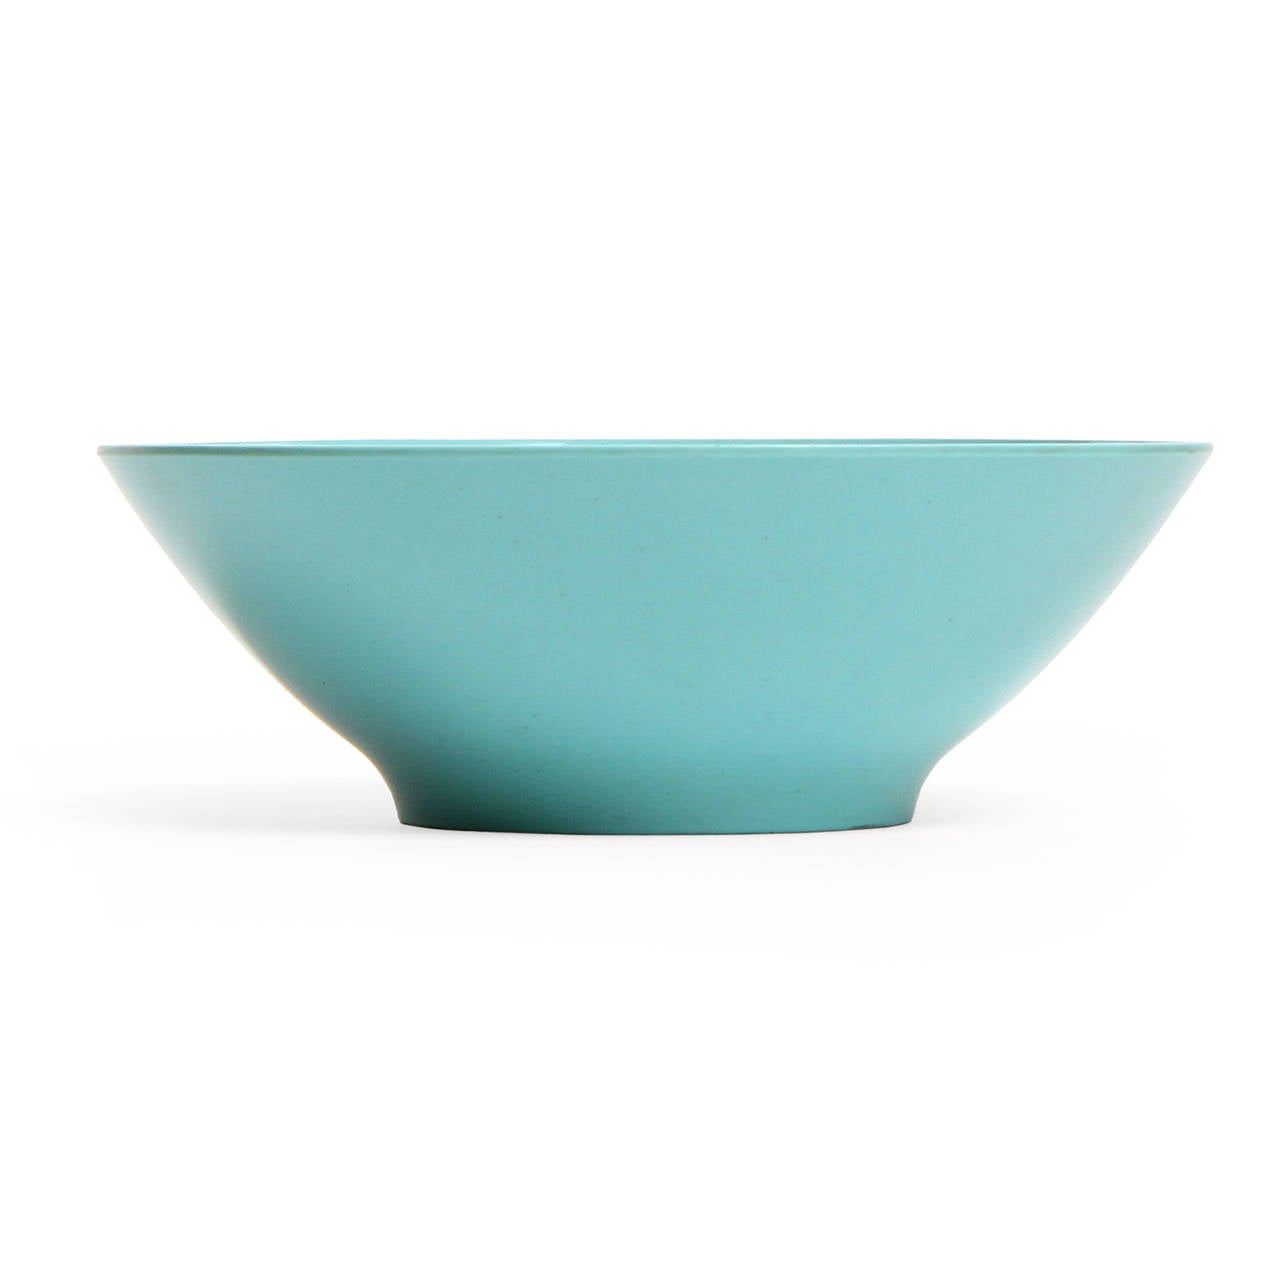 A molded sea foam blue melamine bowl in the Florence pattern from the Prolon series designed for George Nelson and Associates.